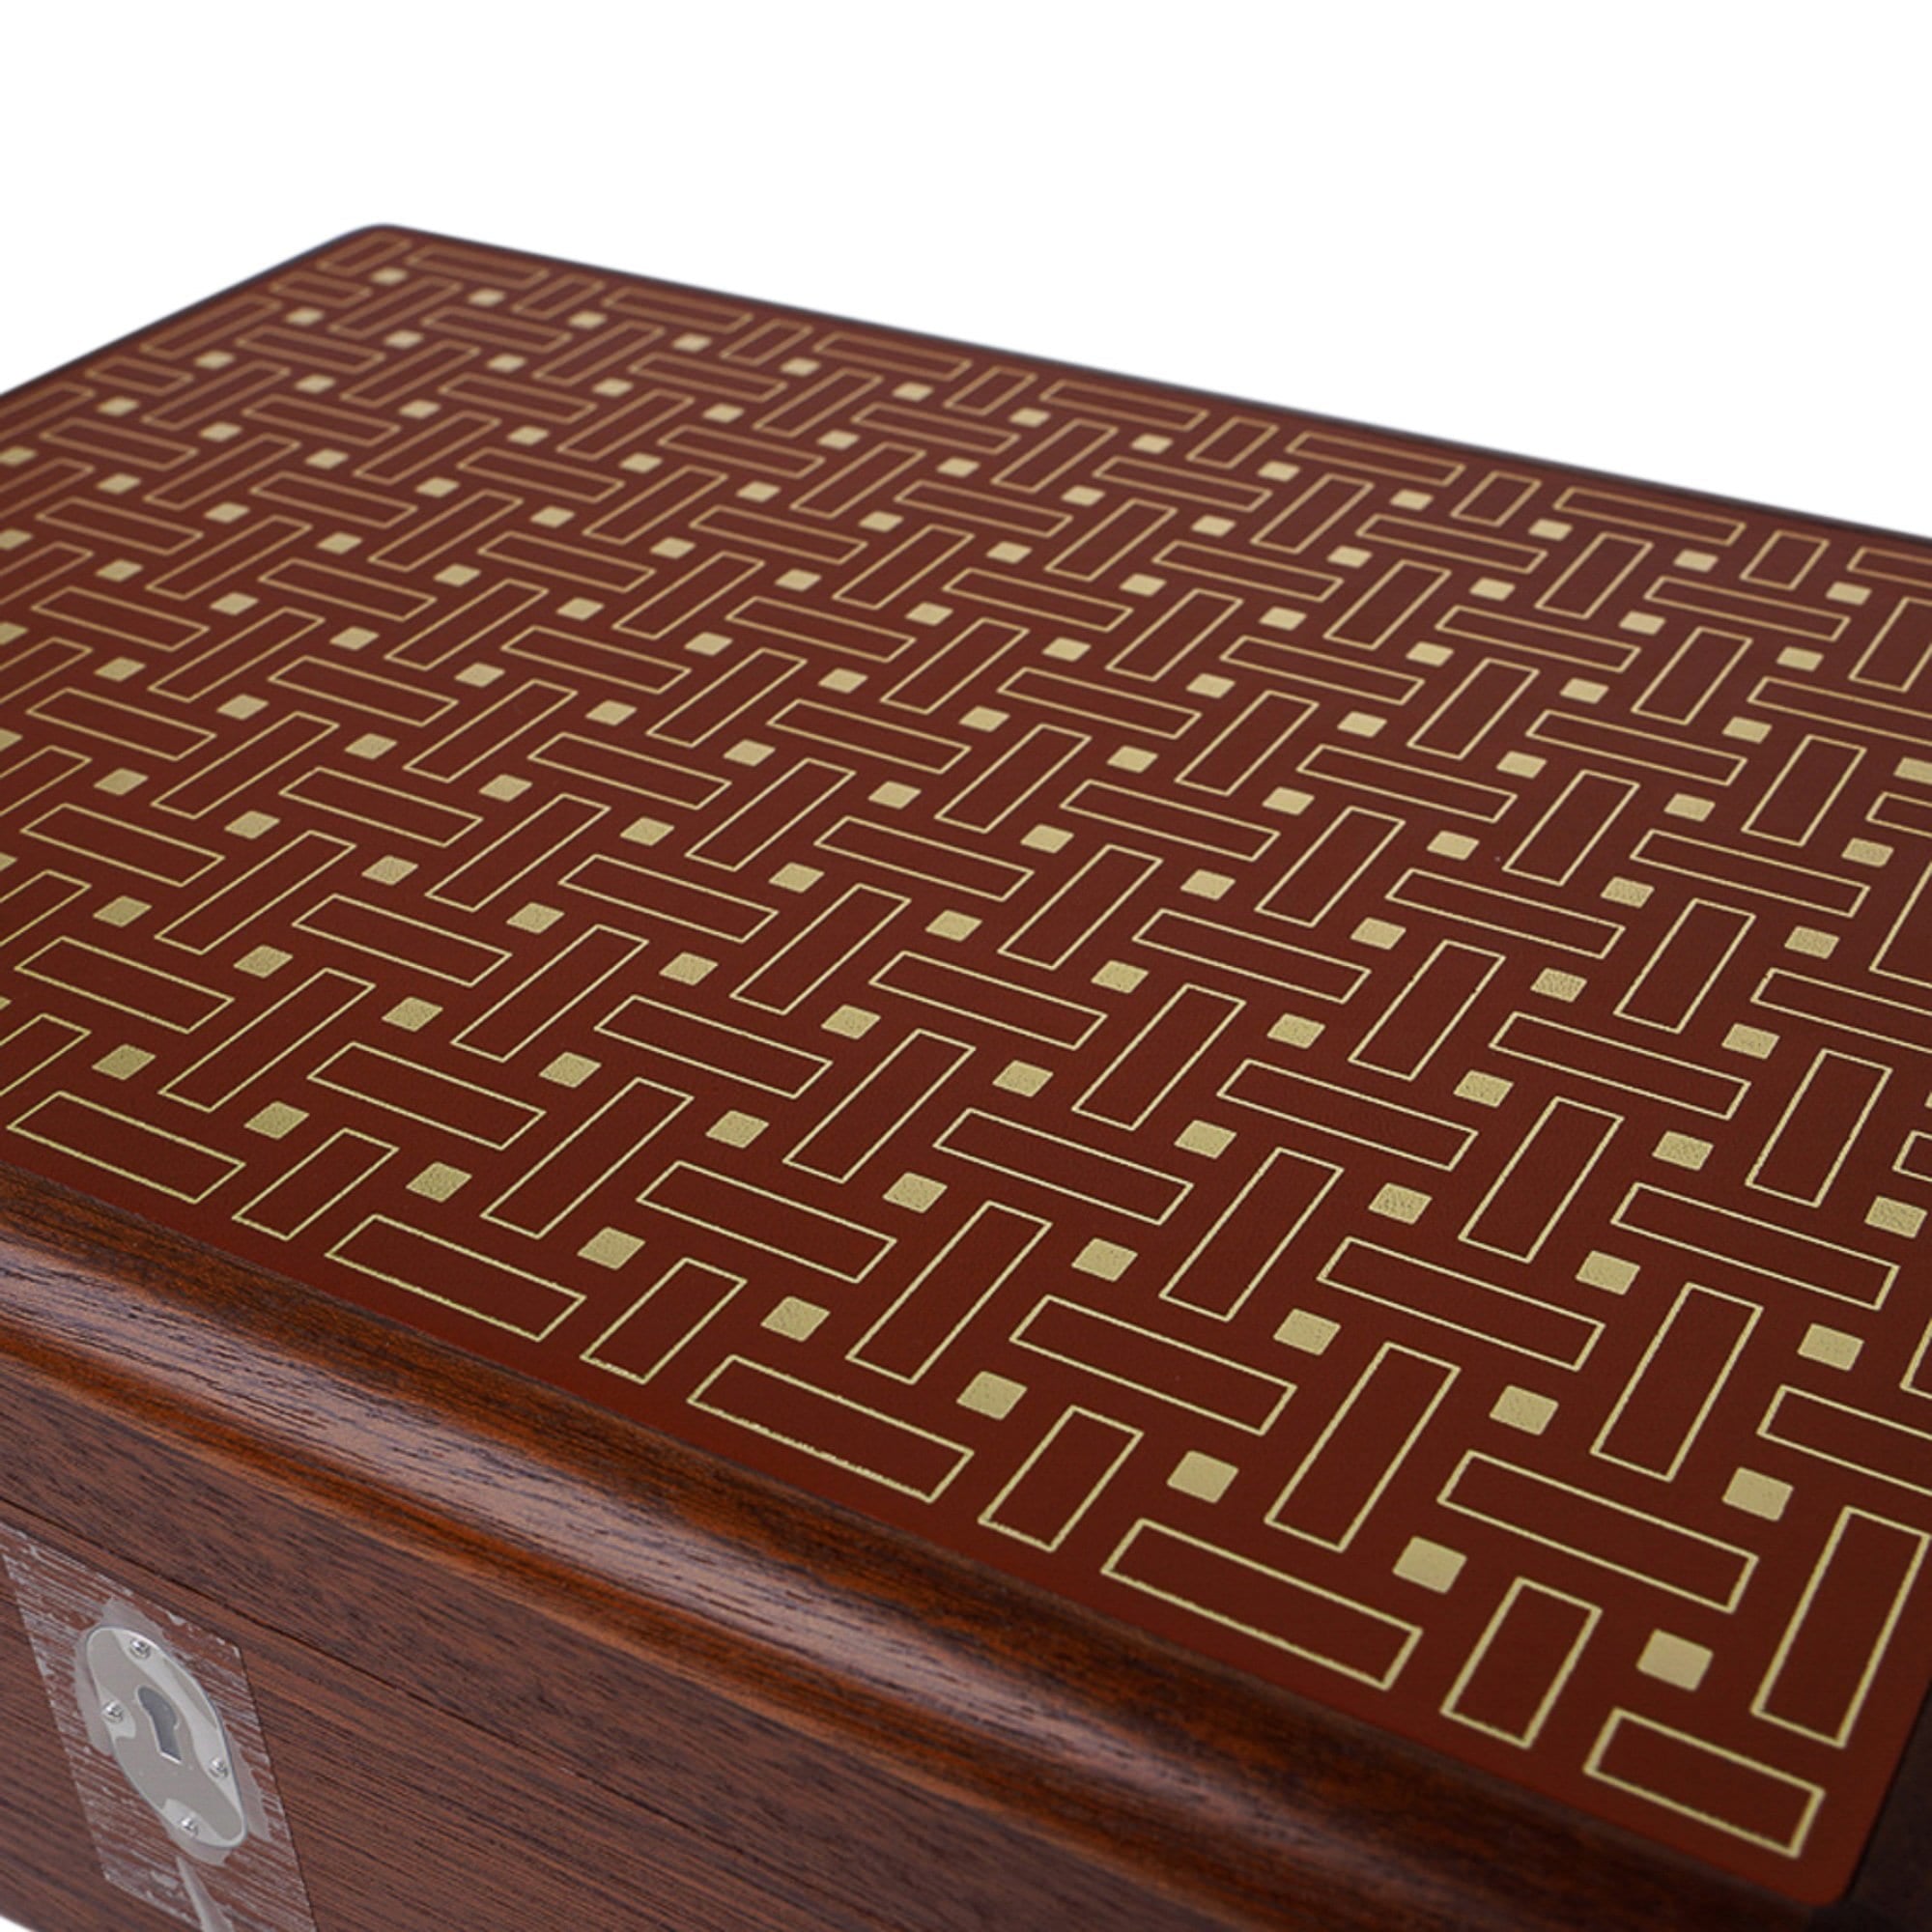 Hermes Elements Poker Box Sycamore New w/Box For Sale at 1stDibs